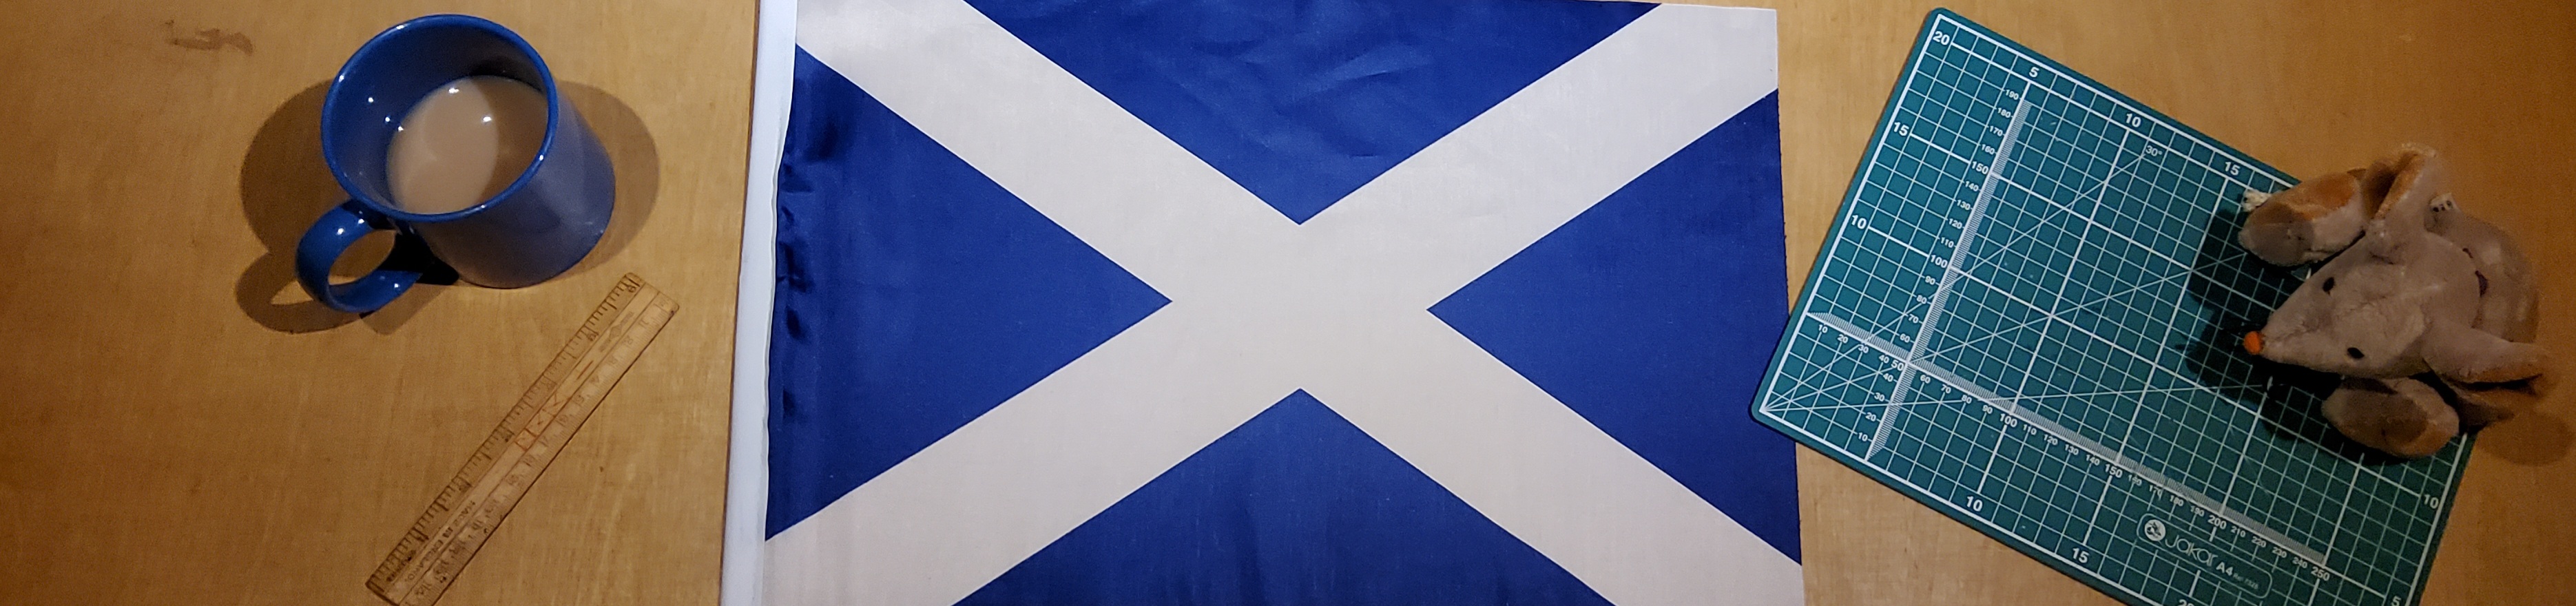 Scotland flag, mouse and mat